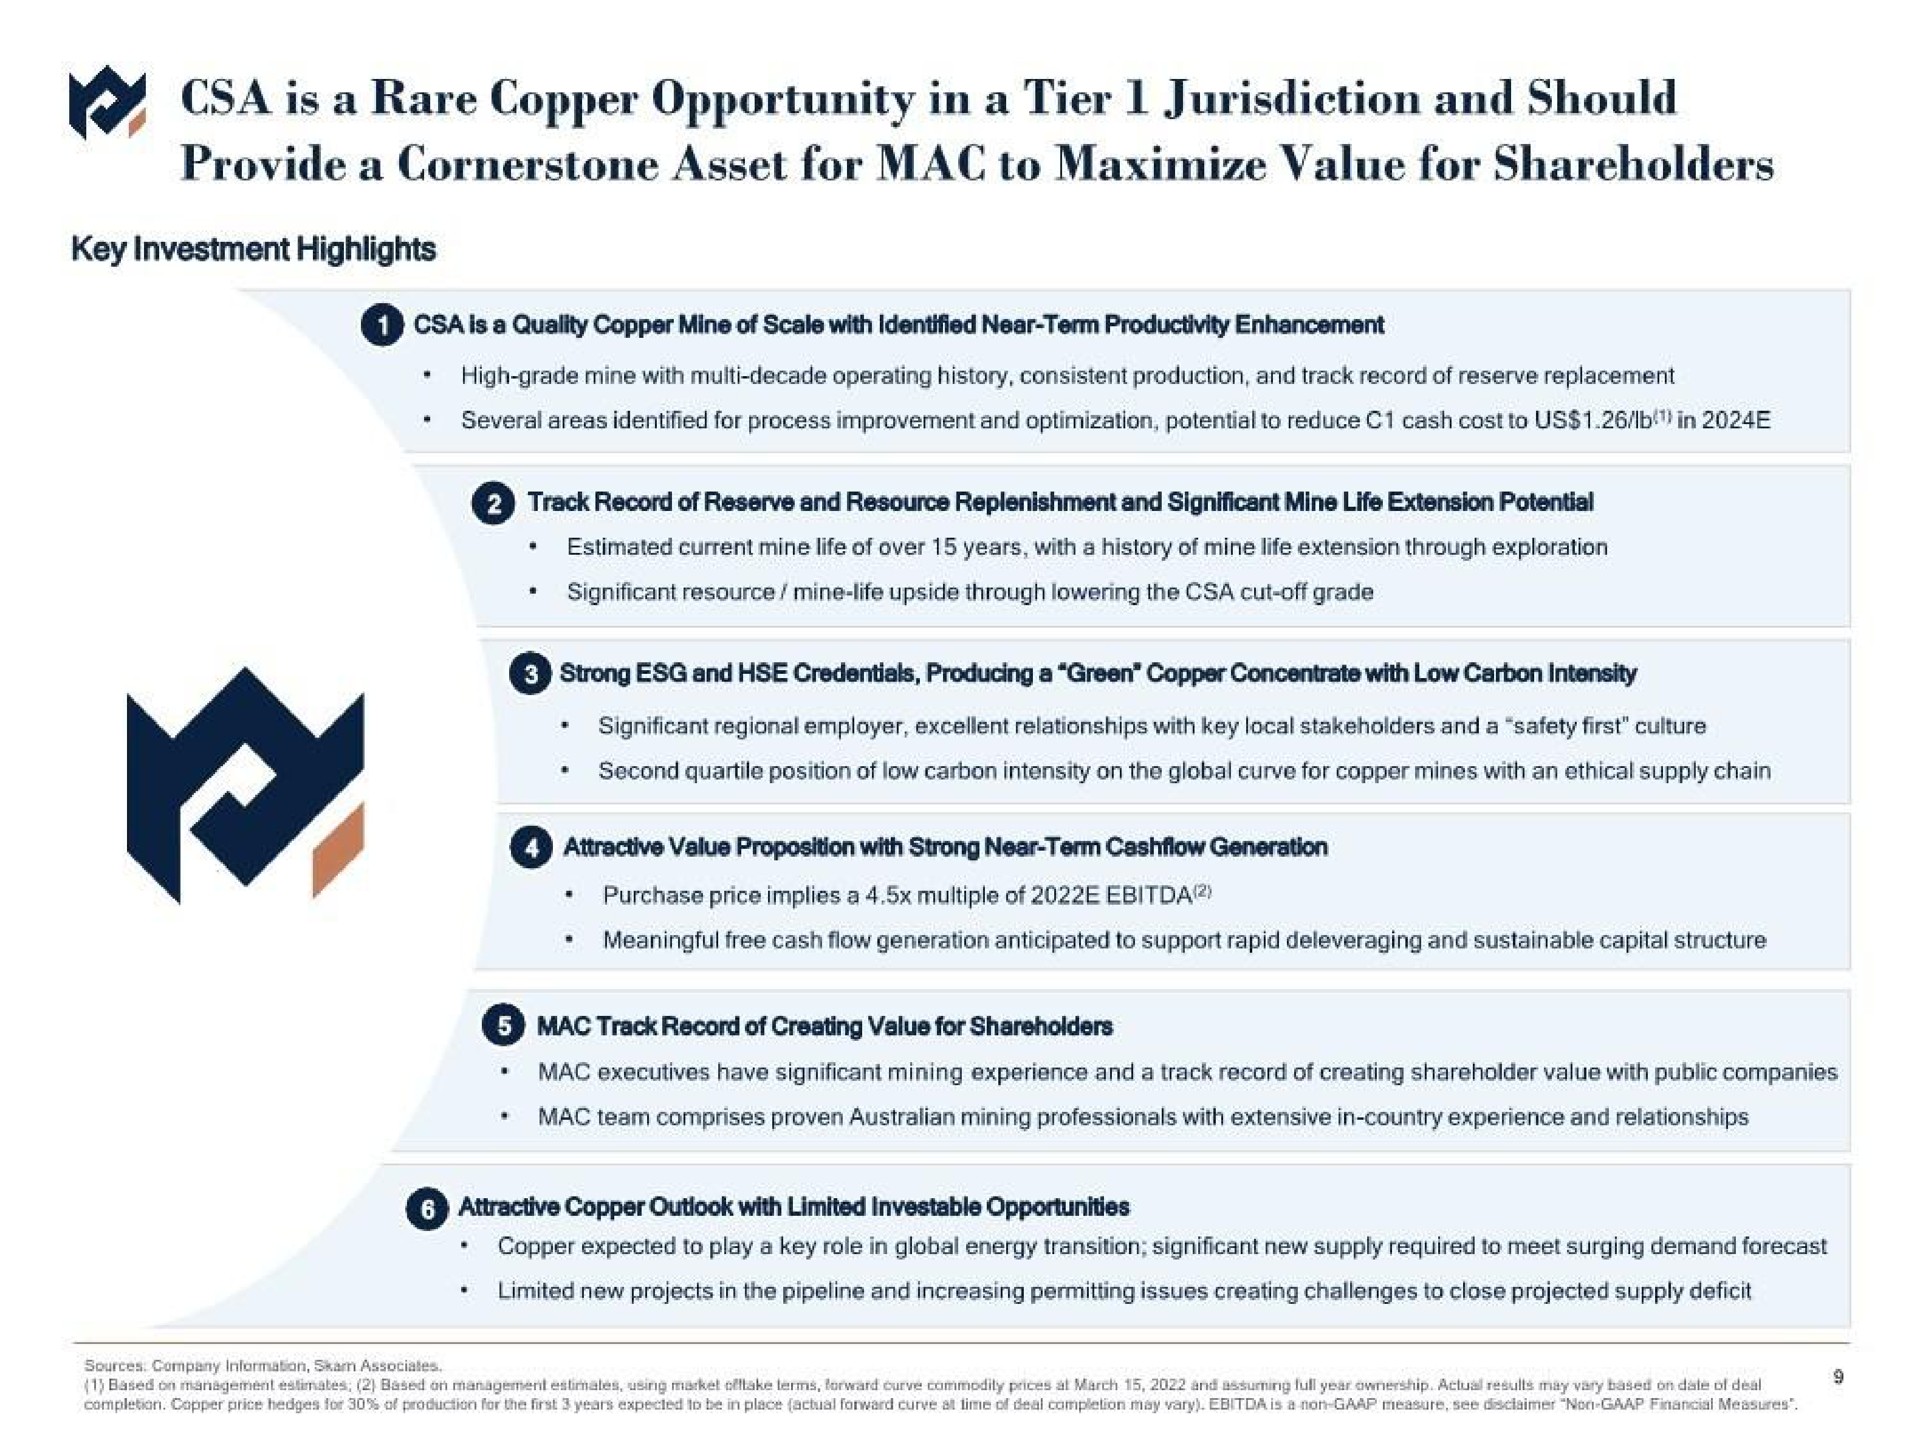 is a rare copper opportunity in a tier jurisdiction and should provide a cornerstone asset for mac to maximize value for shareholders is a quality copper mine of scale with identified near term productivity enhancement track record of reserve and resource replenishment and significant mine life extension potential mac track record of creating value for shareholders attractive copper outlook with limited investable opportunities | Metals Acquisition Corp